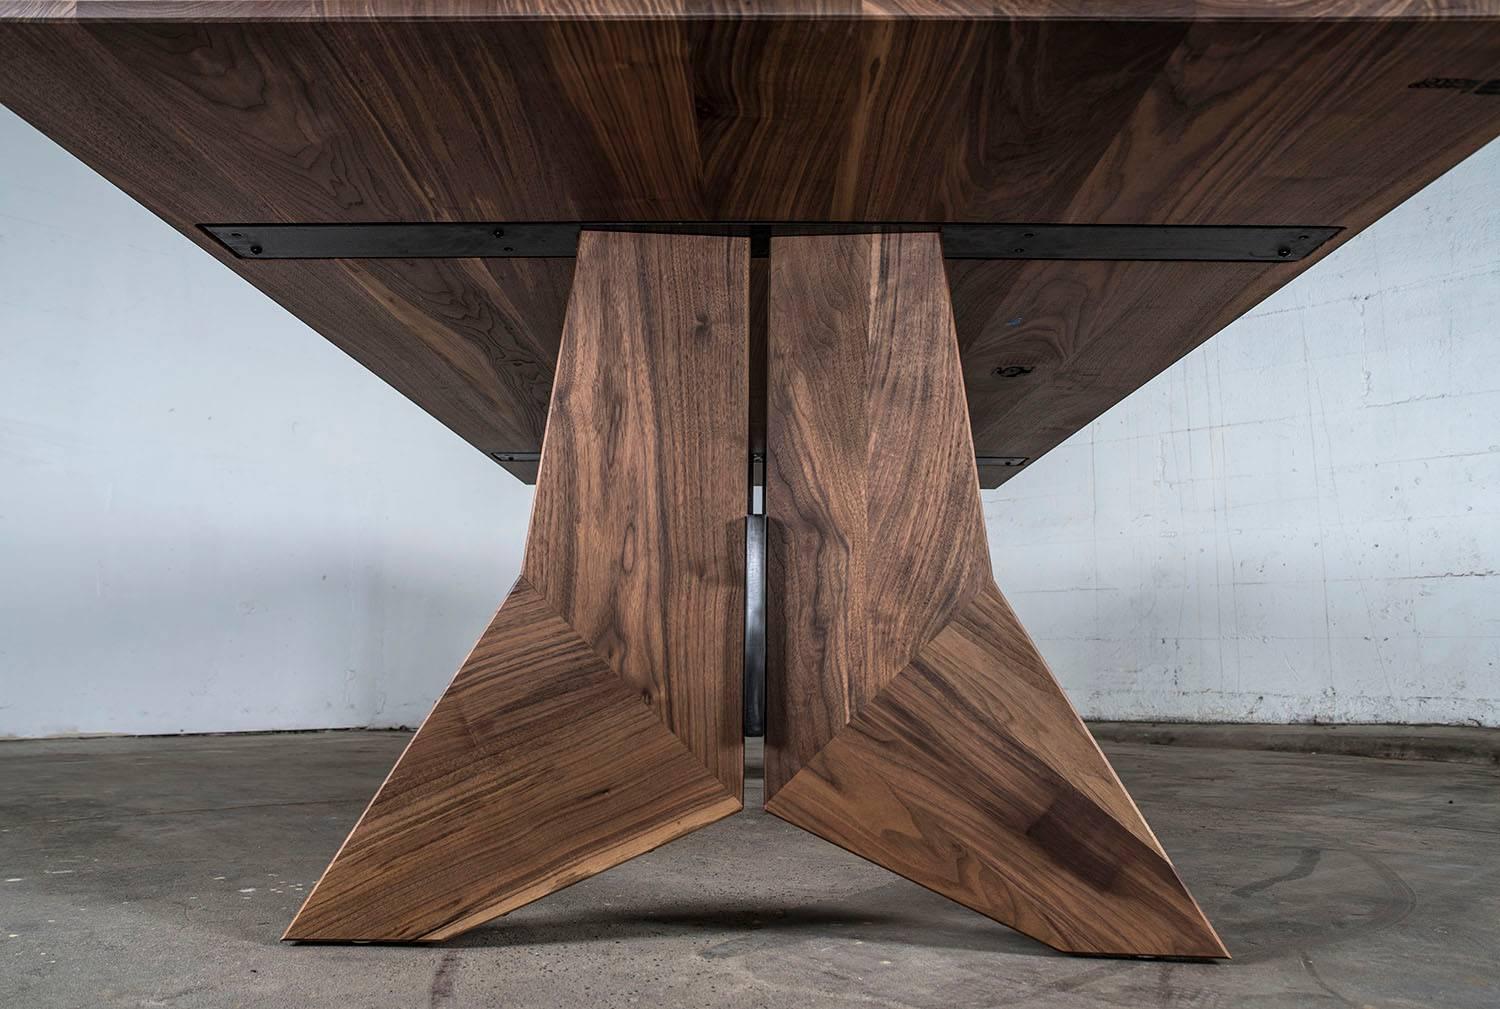 Hardwood and steel modern dining table, the Peralta dining table, is the first new design of 2017. With its sharp angles and the subtle marriage of hot rolled plate steel and Domestic hardwoods, it is a step in a new minimalist direction.

Can be